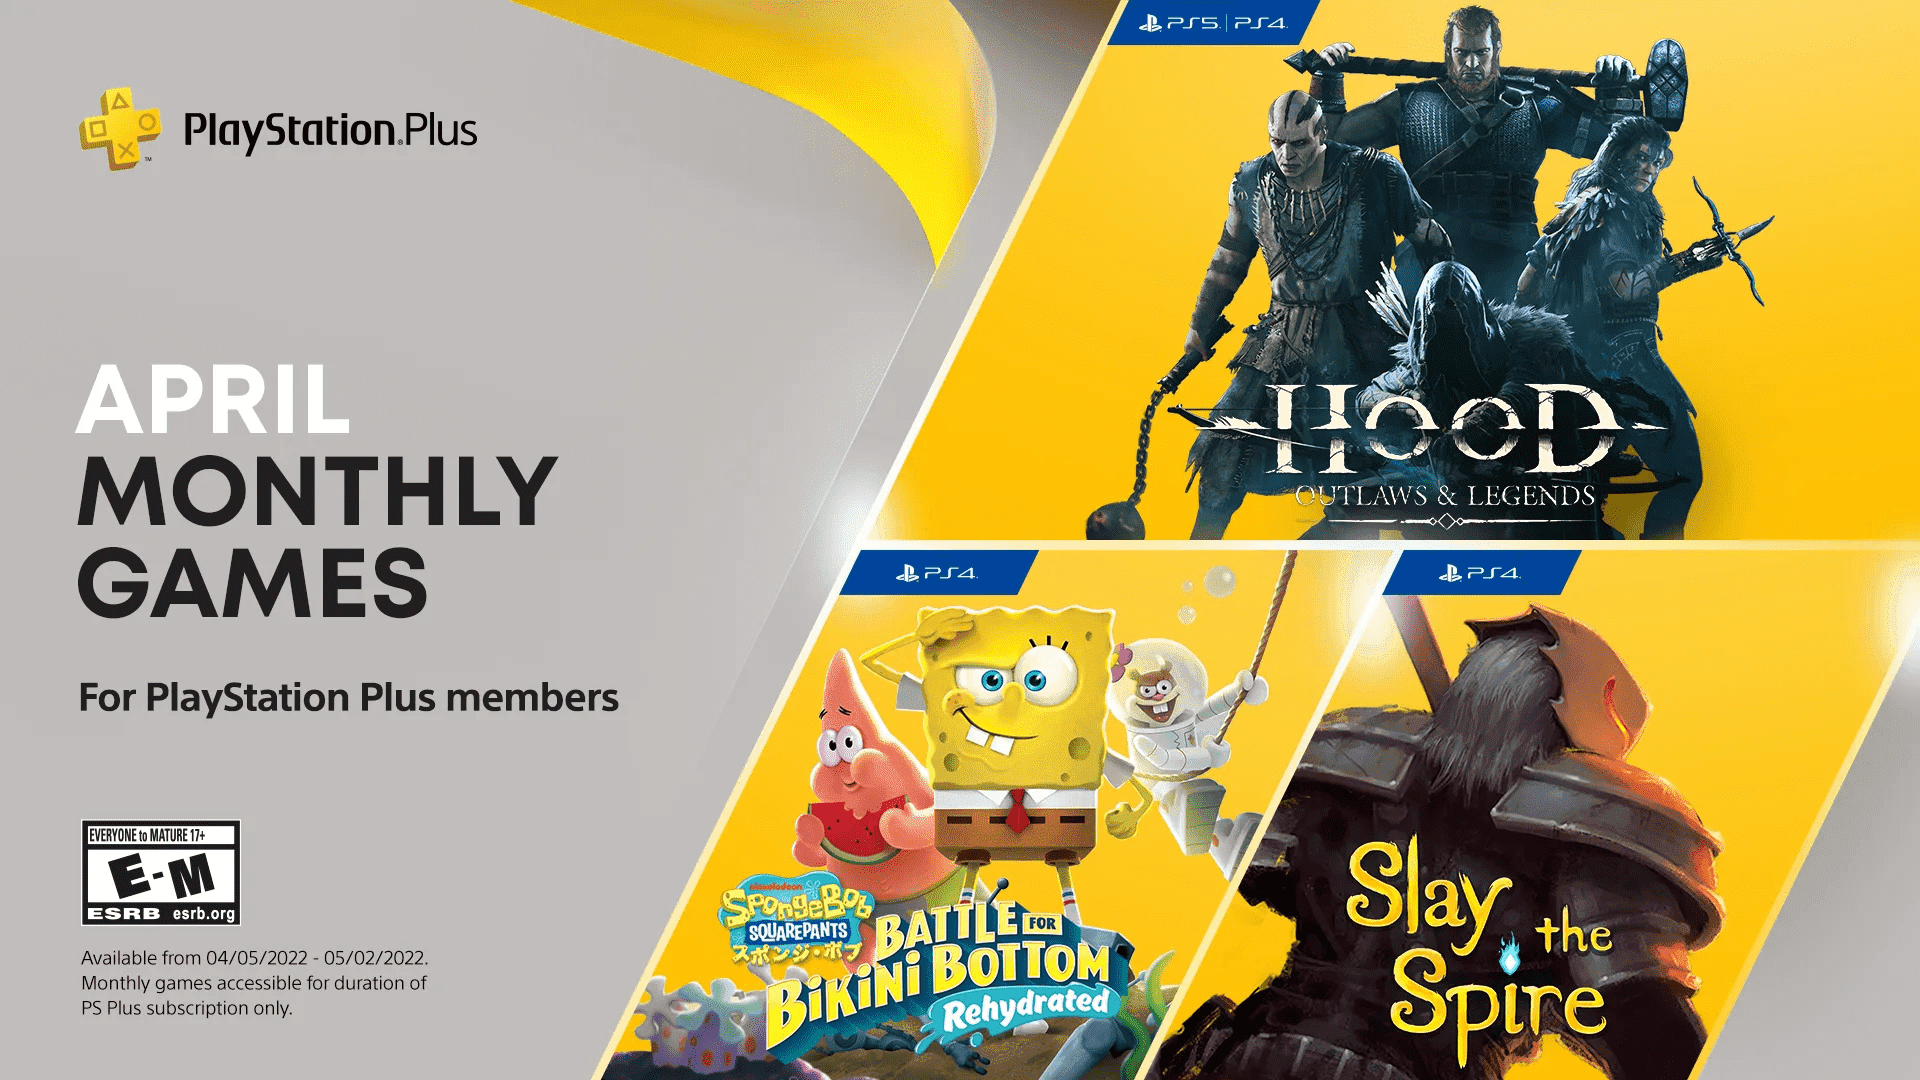 PS Plus free games of April 2022 have been revealed